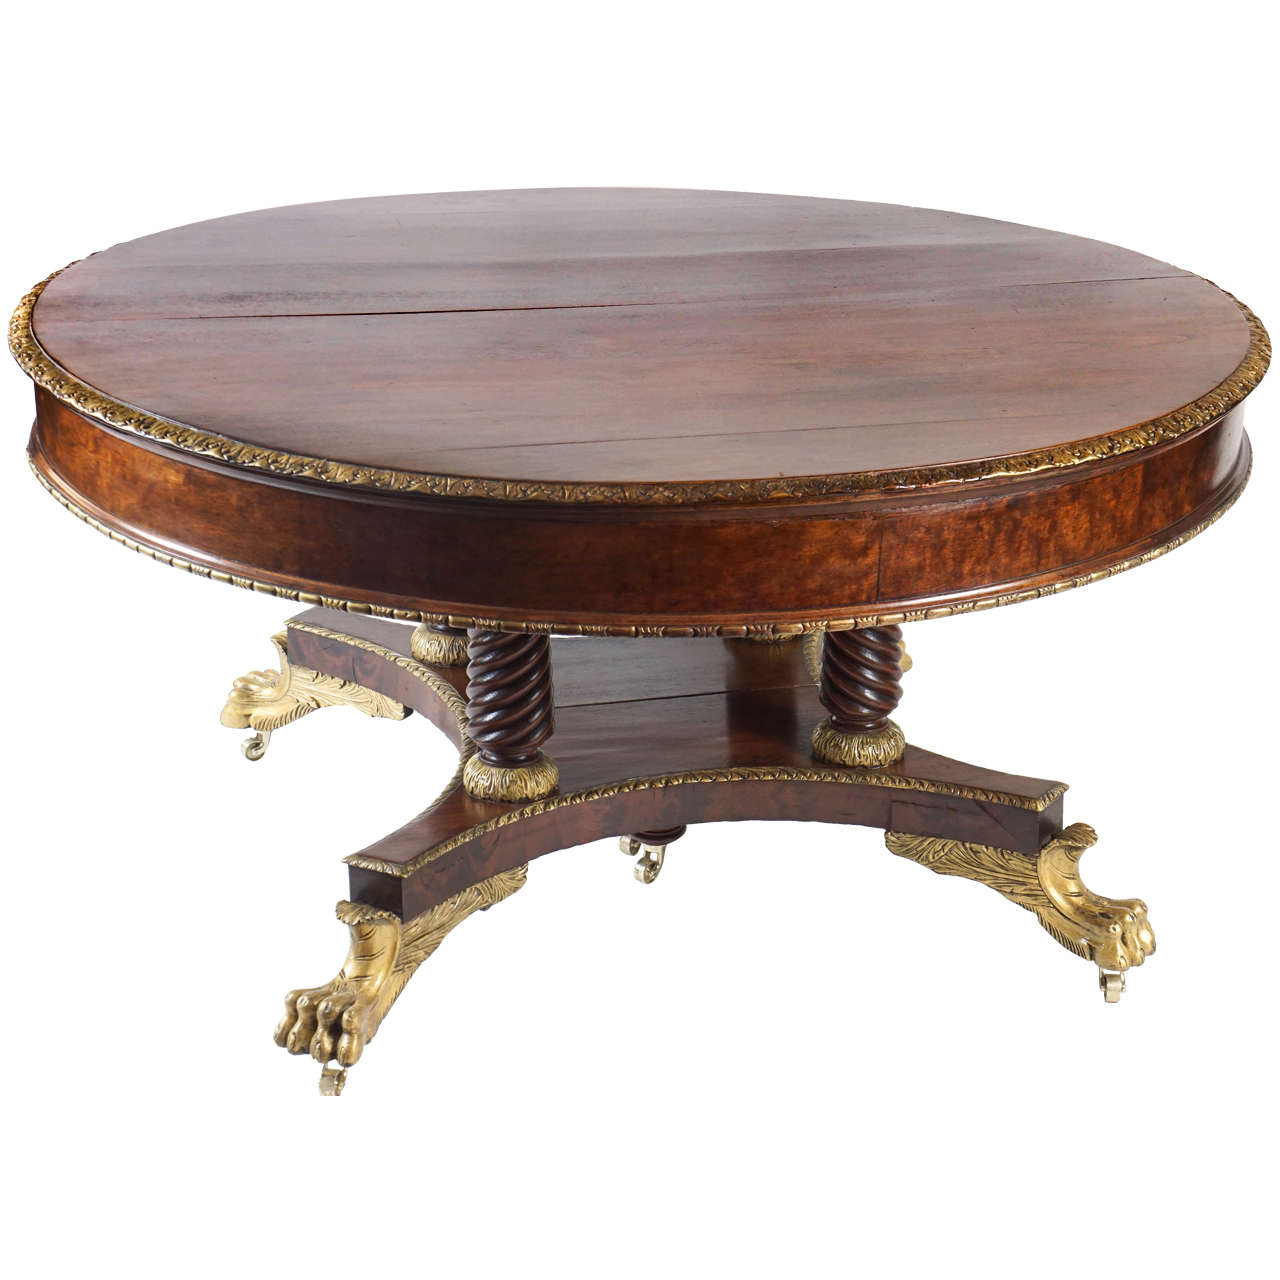 Rare circa 1880 Duncan Phyfe influenced parcel-gilt mahogany extendable dining table attributed to the New York City firm of cabinetmakers Meier and Hagen having round top with carved acanthus gilt top edge and gilt bead-and-reel at bottom apron